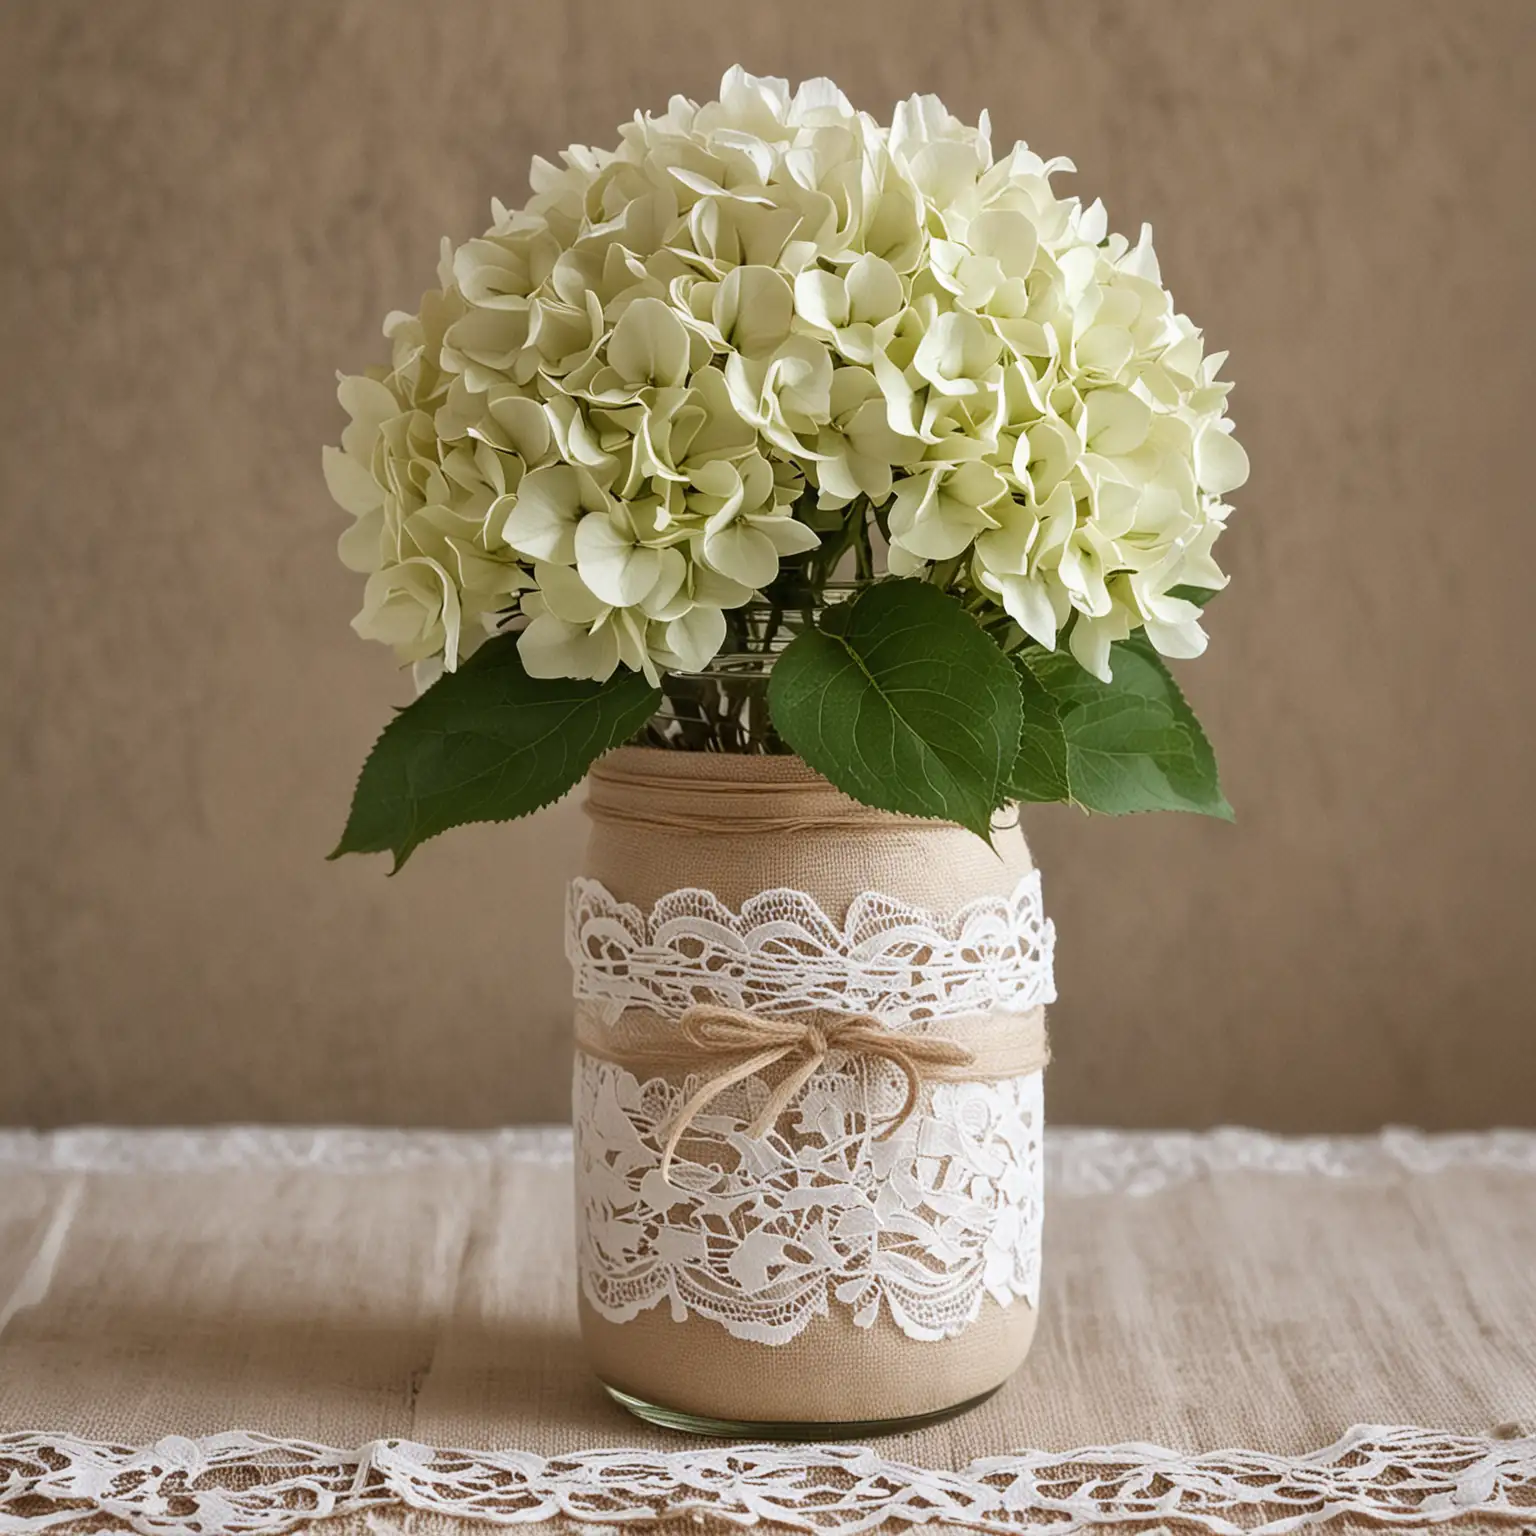 Rustic-Wedding-Centerpiece-Ivory-Linen-Jar-with-White-Lace-and-Hydrangea